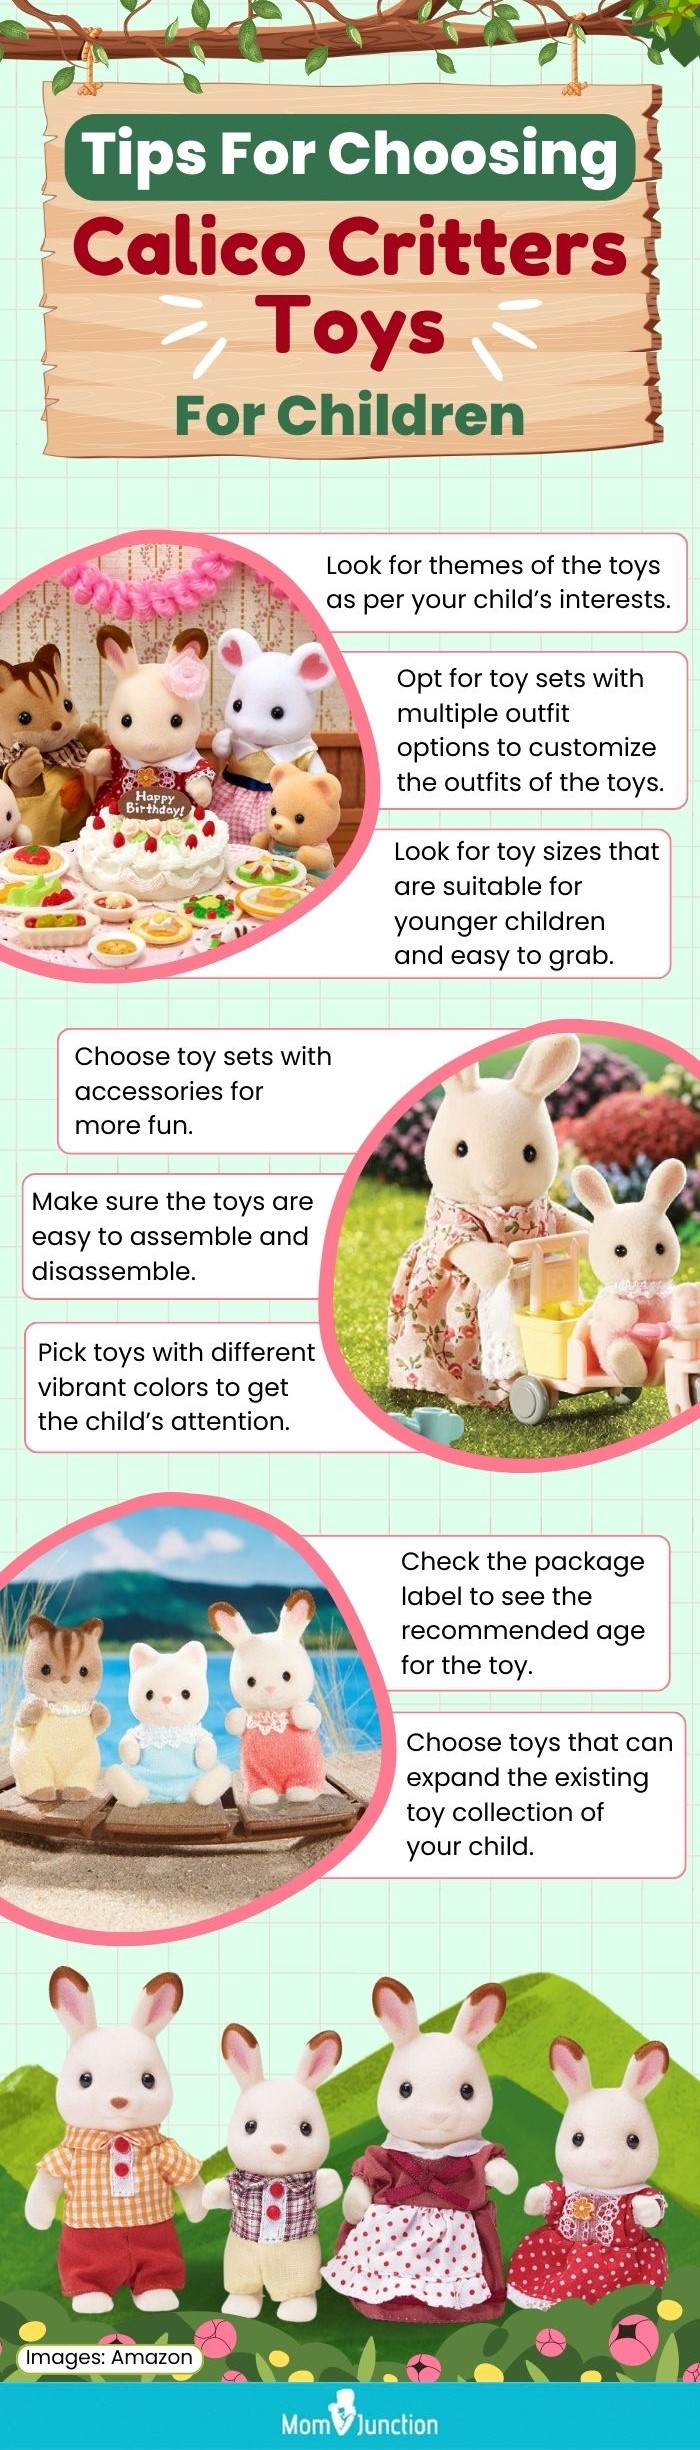 Tips For Choosing Calico Critters Toys For Children (infographic)